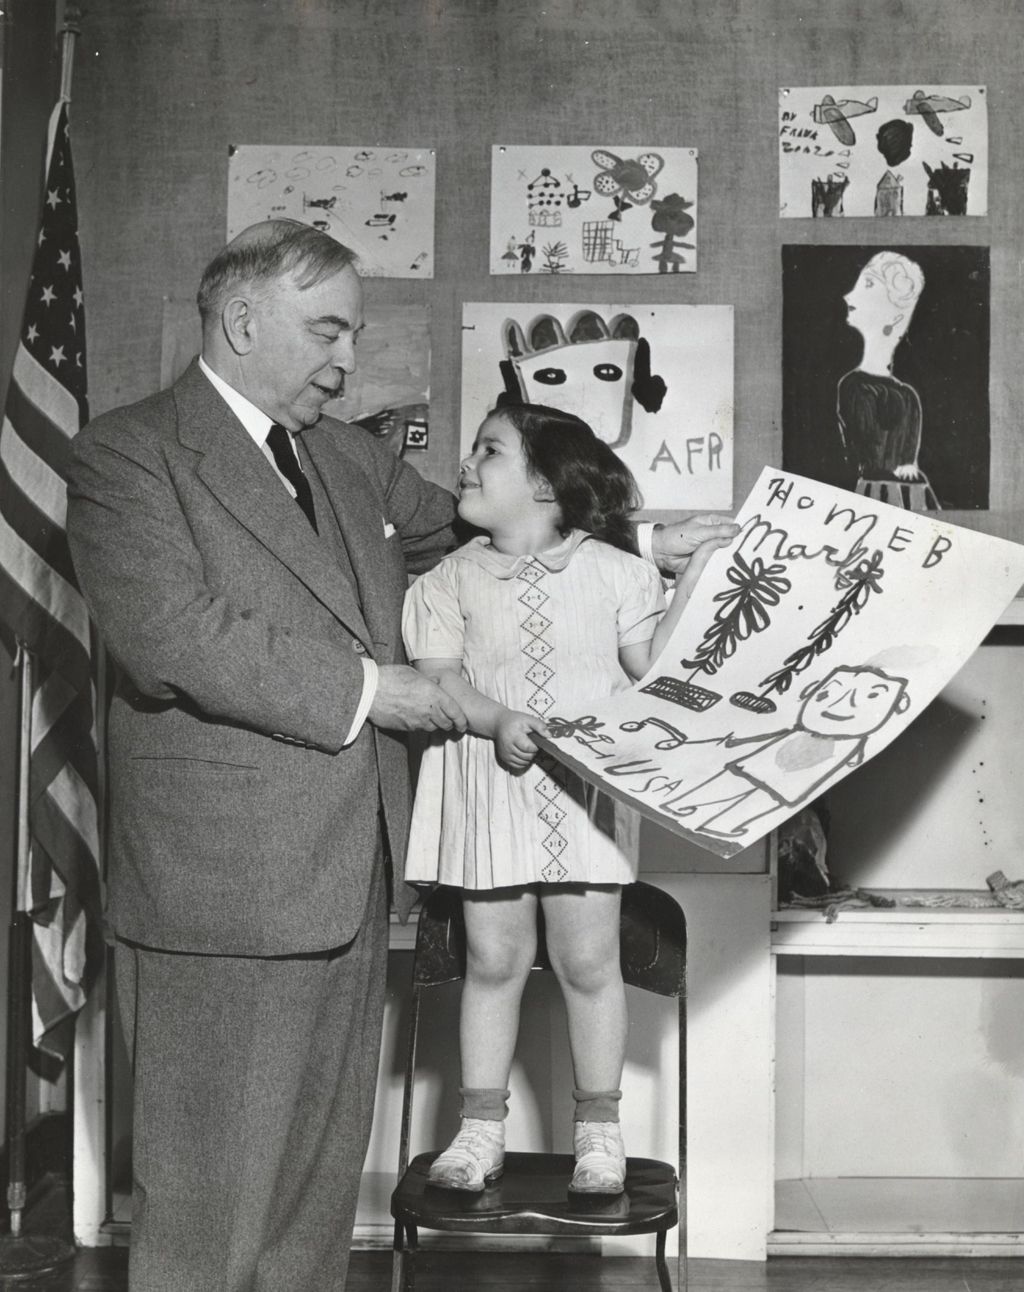 Canadian Prime Minister and former Hull-House resident W. L. Mackenzie King poses with a girl standing on a chair holding up her artwork